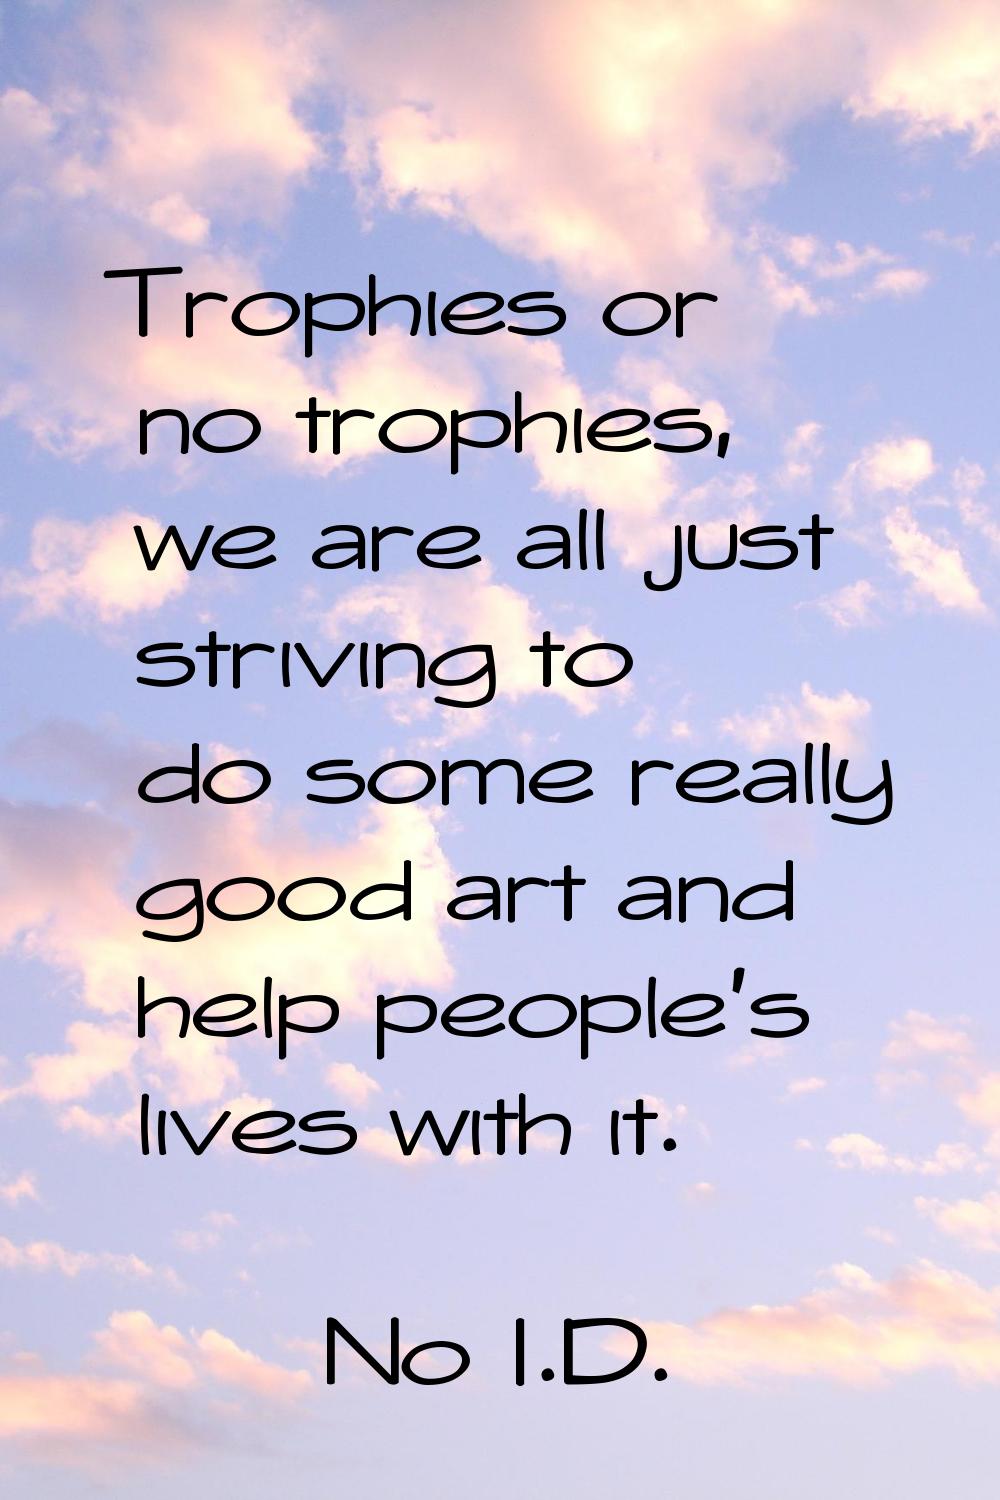 Trophies or no trophies, we are all just striving to do some really good art and help people's live